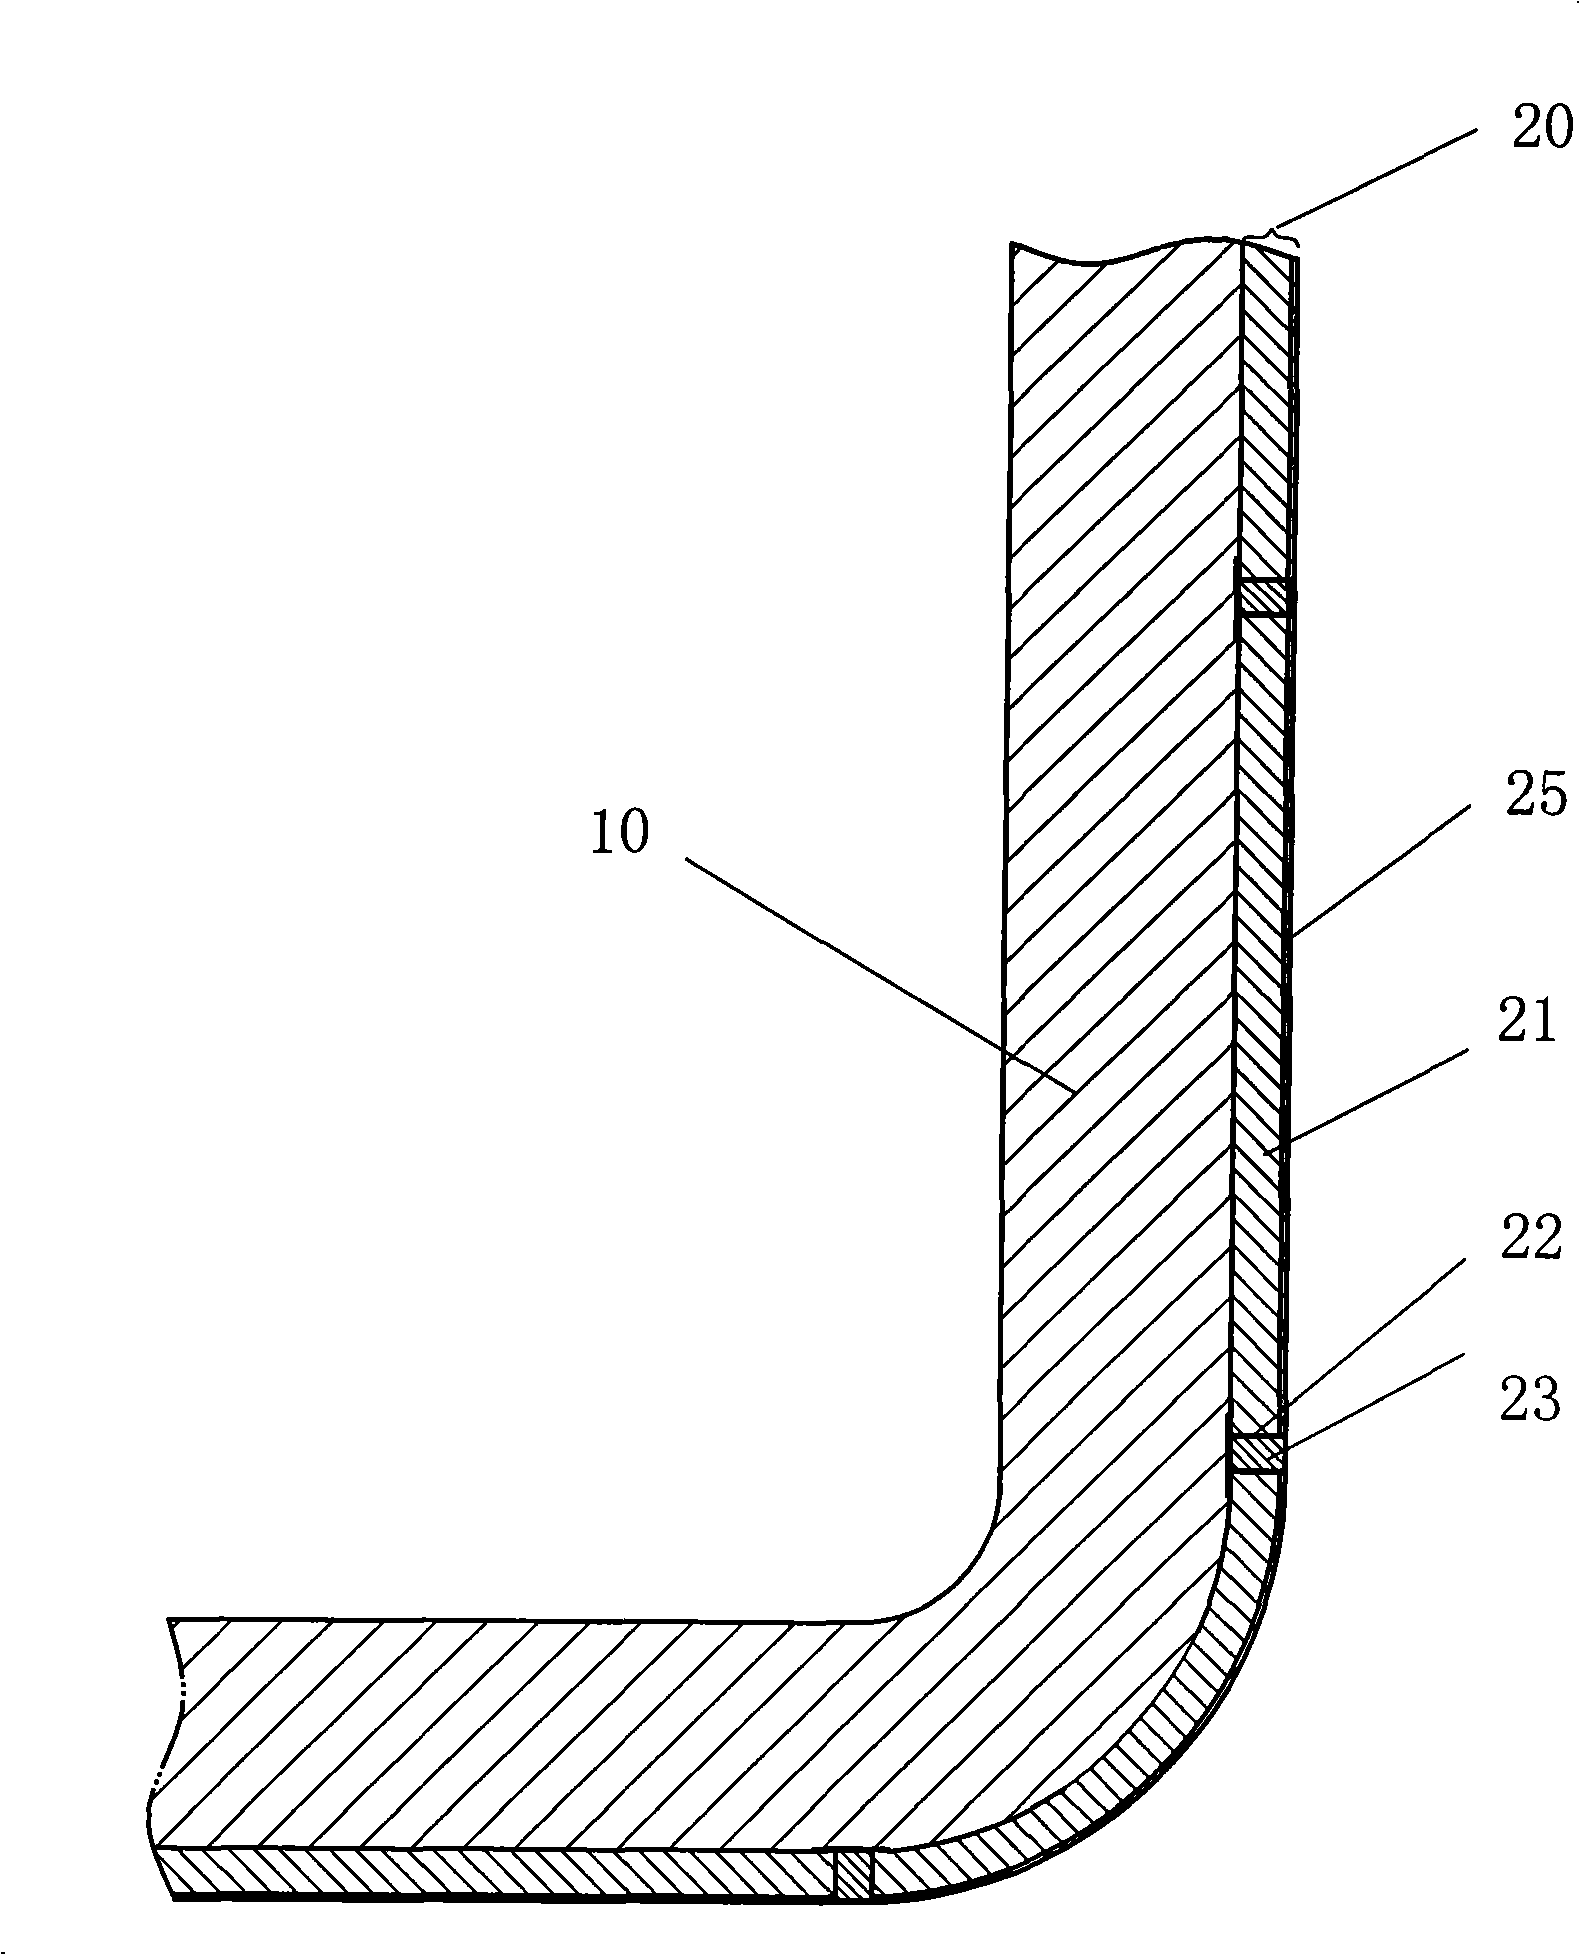 Construction body with thermal insulation and construction method